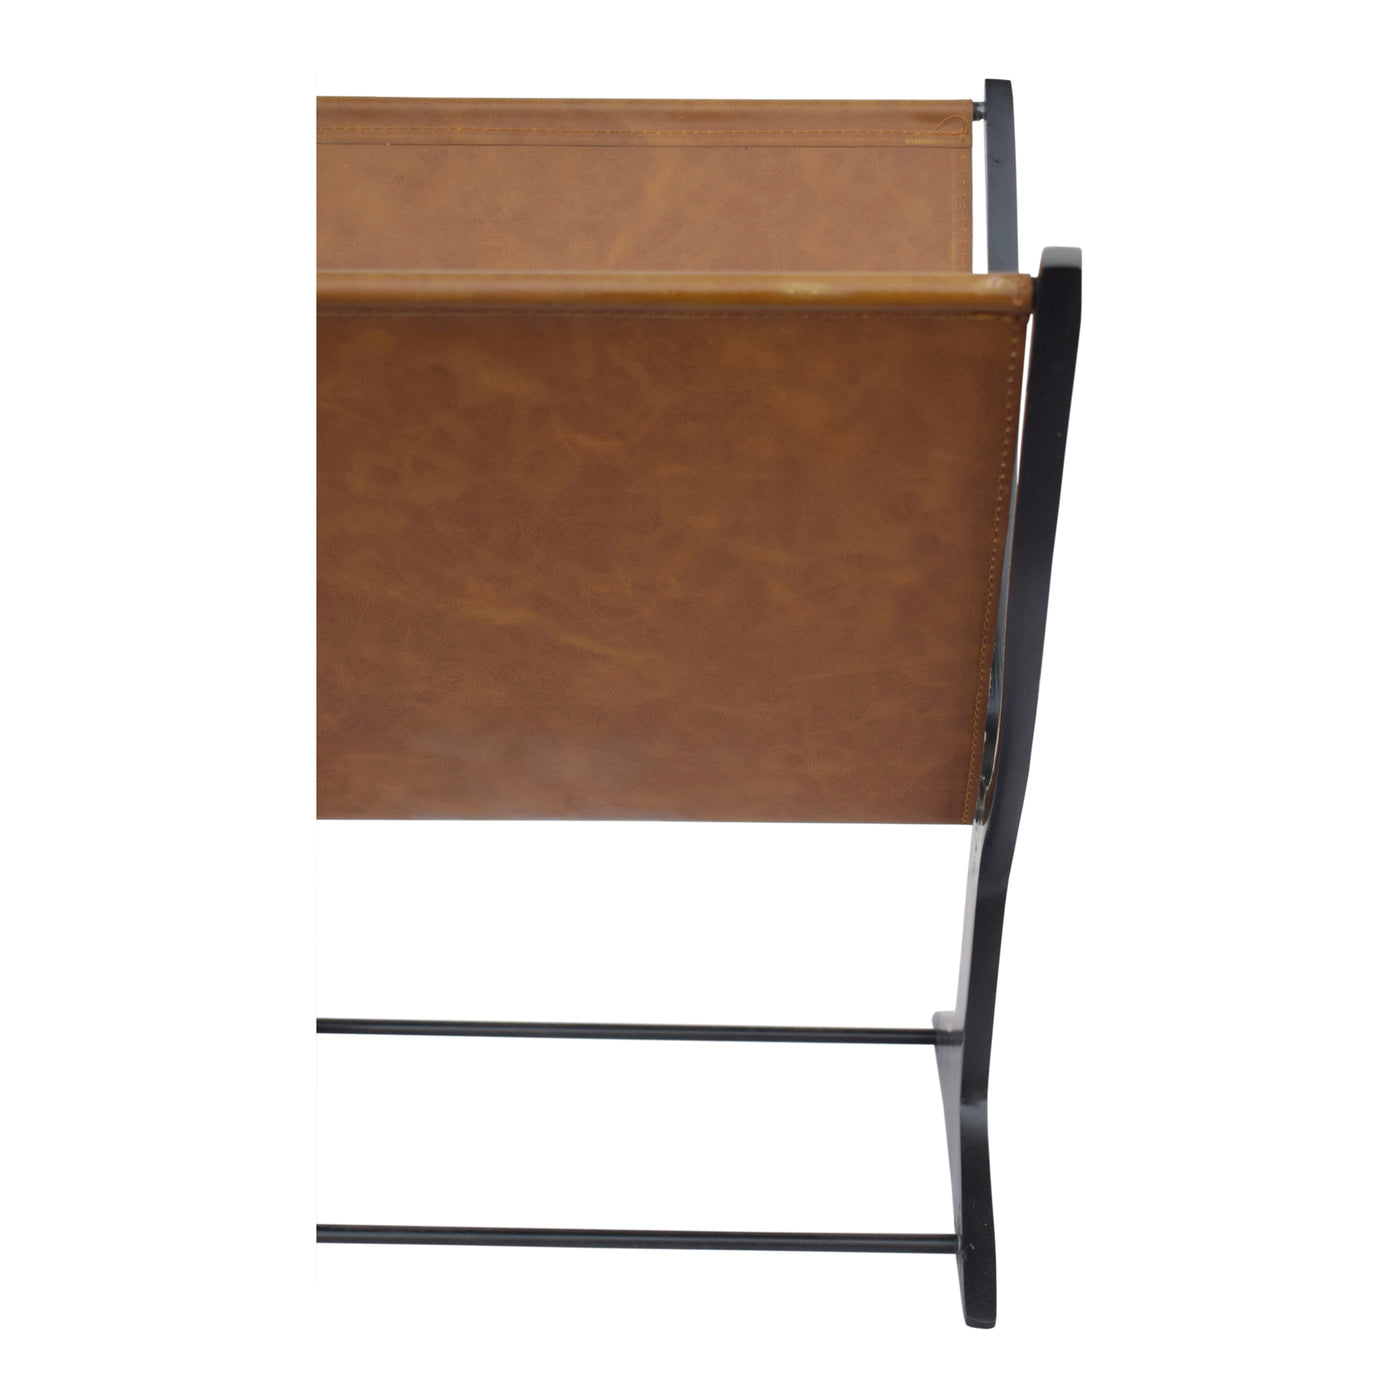 Clean, bold lines, classic brown-leather, and a complimentary jet-black frame make this stunning magazine rack. Keep your ...